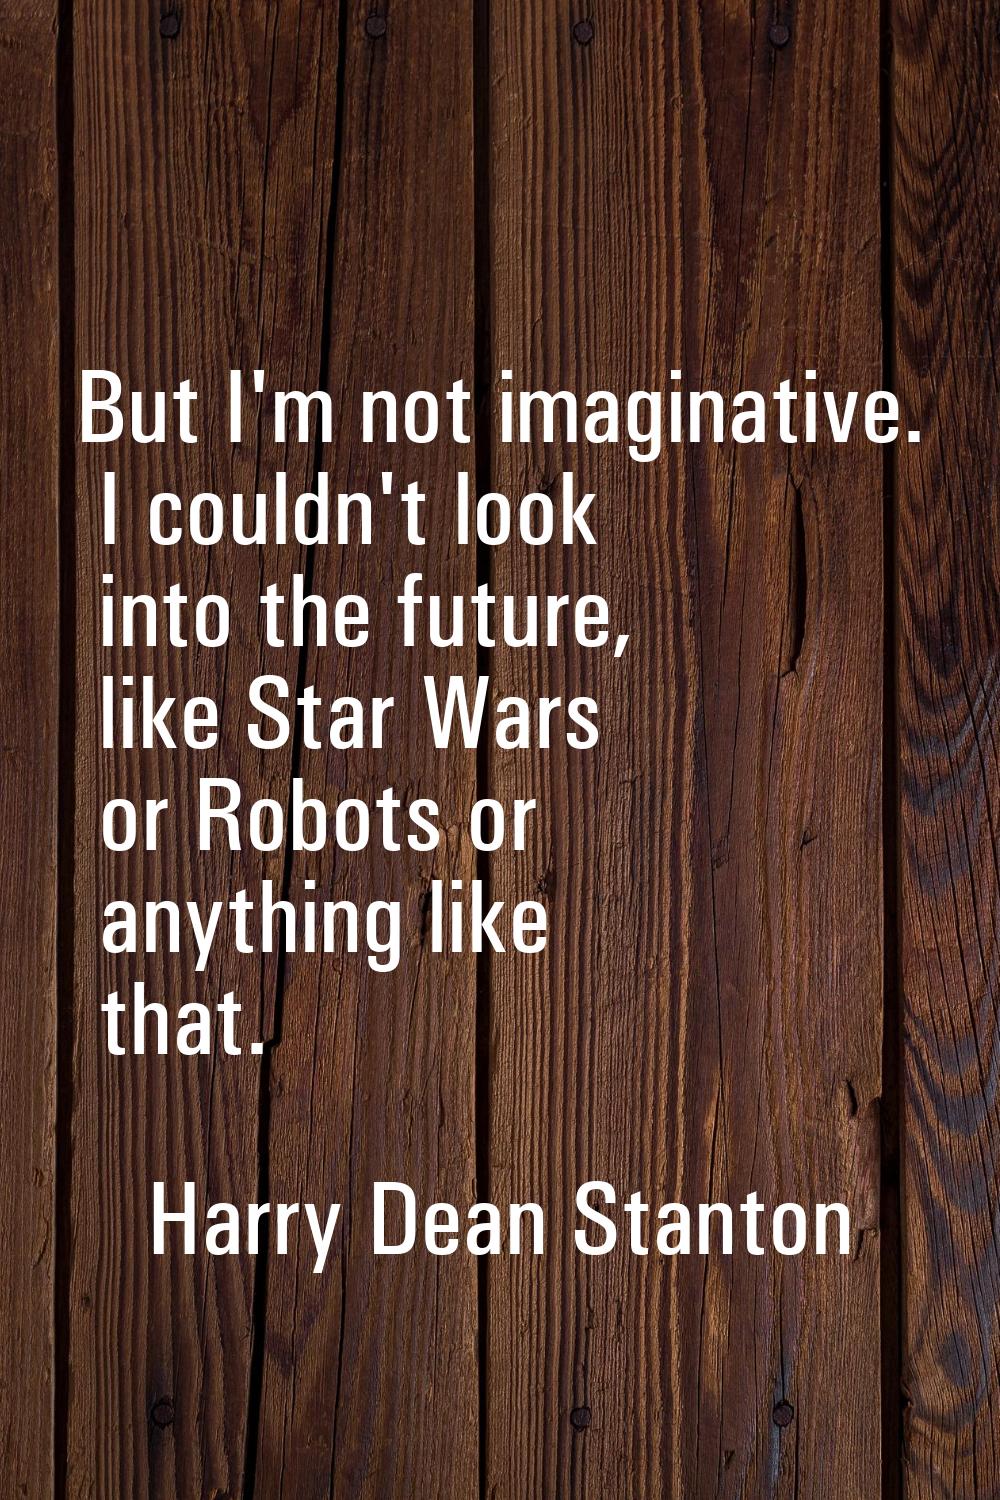 But I'm not imaginative. I couldn't look into the future, like Star Wars or Robots or anything like